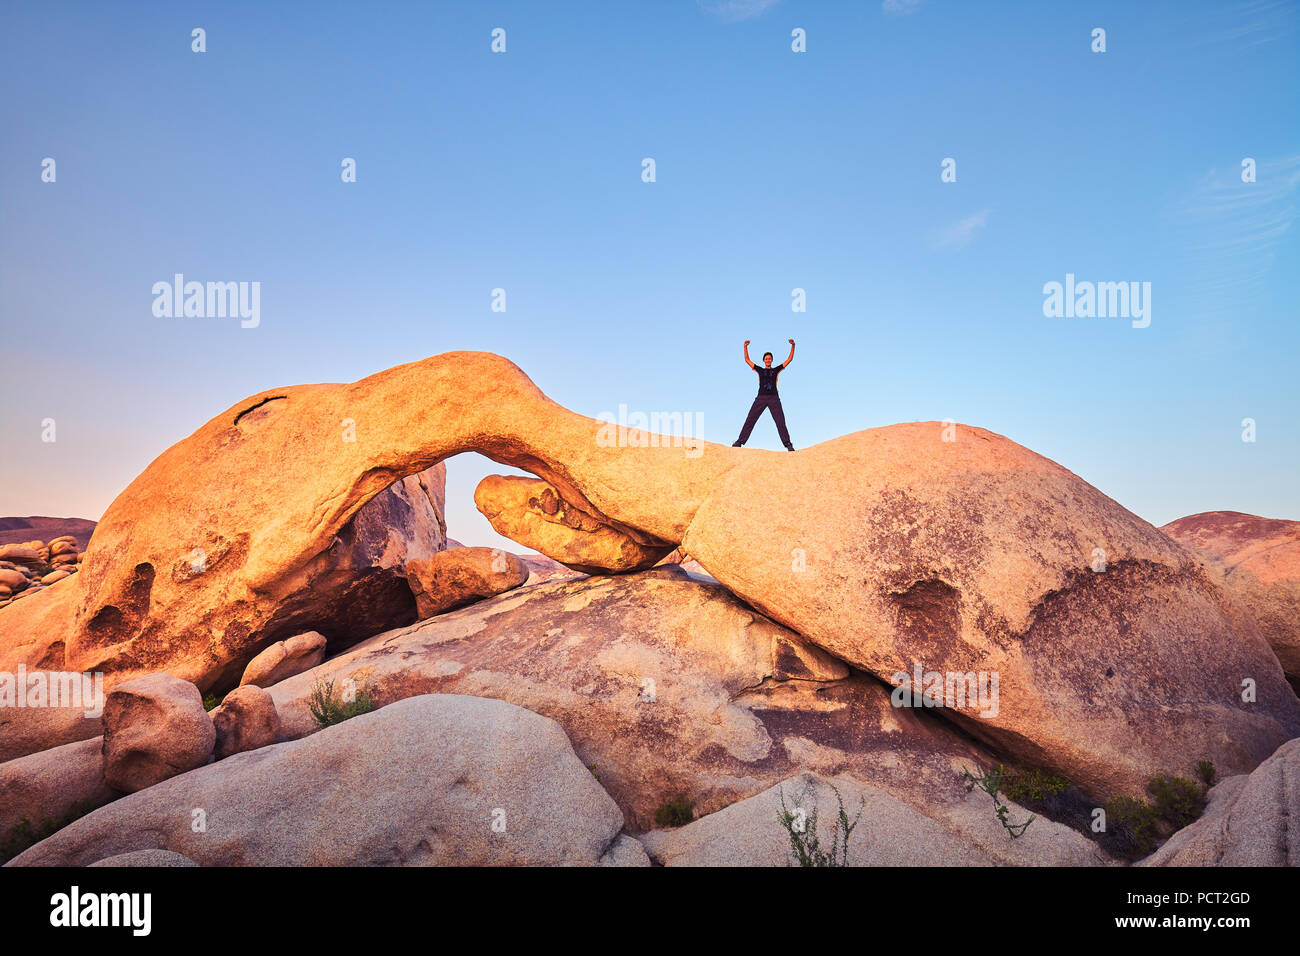 Unique rock formations at Joshua Tree National Park with female climber at sunset, California, USA. Stock Photo